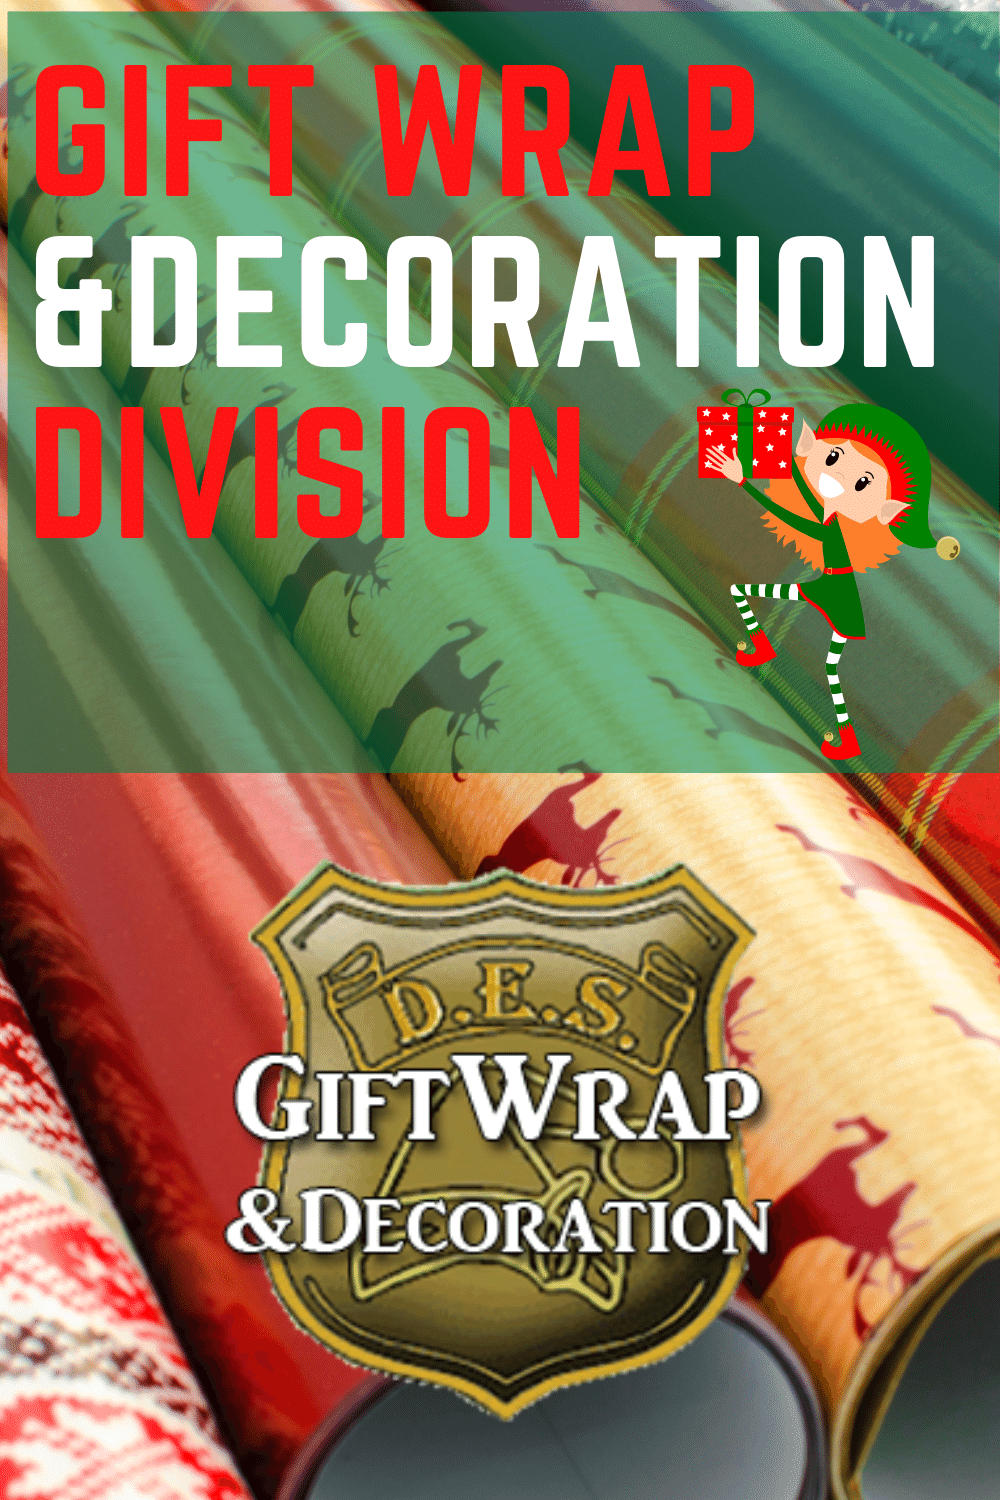 Division of Gift Wrap and Decoration